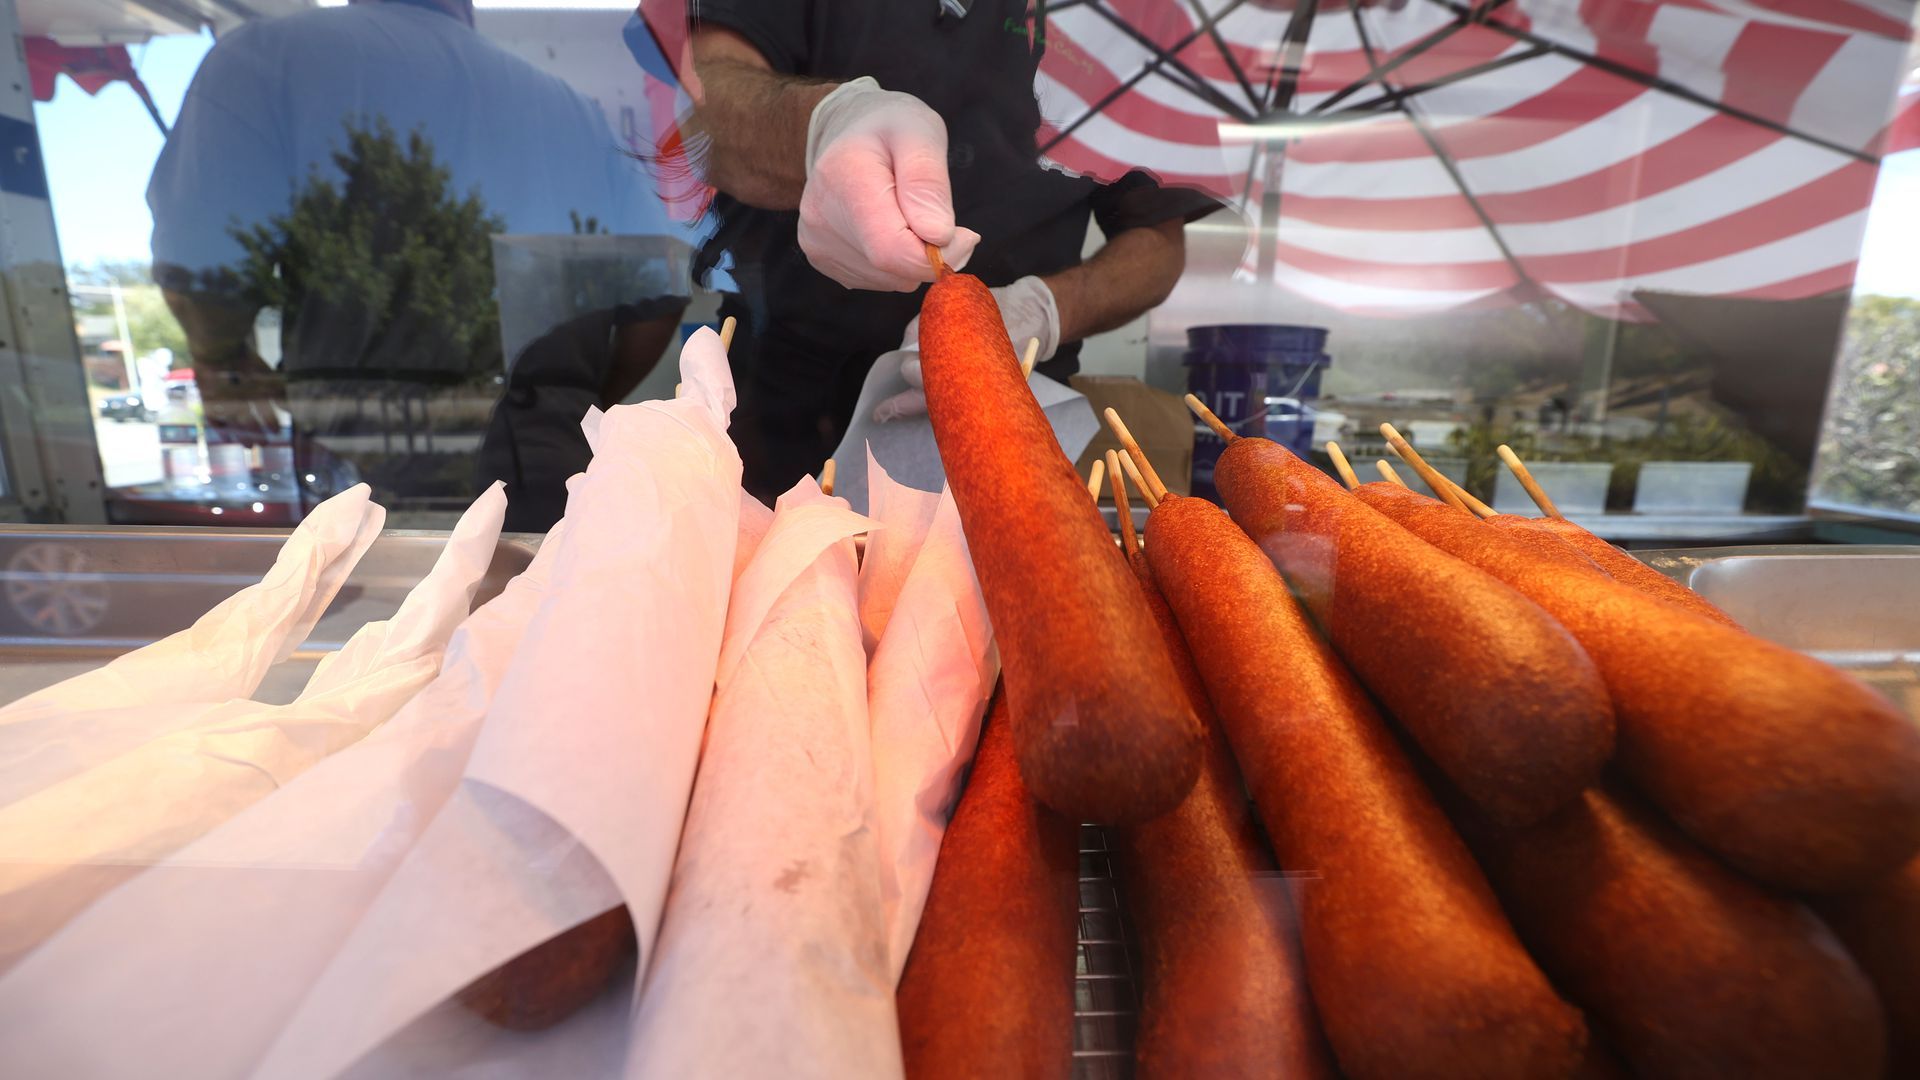 A row of corndogs, with some wrapped in paper